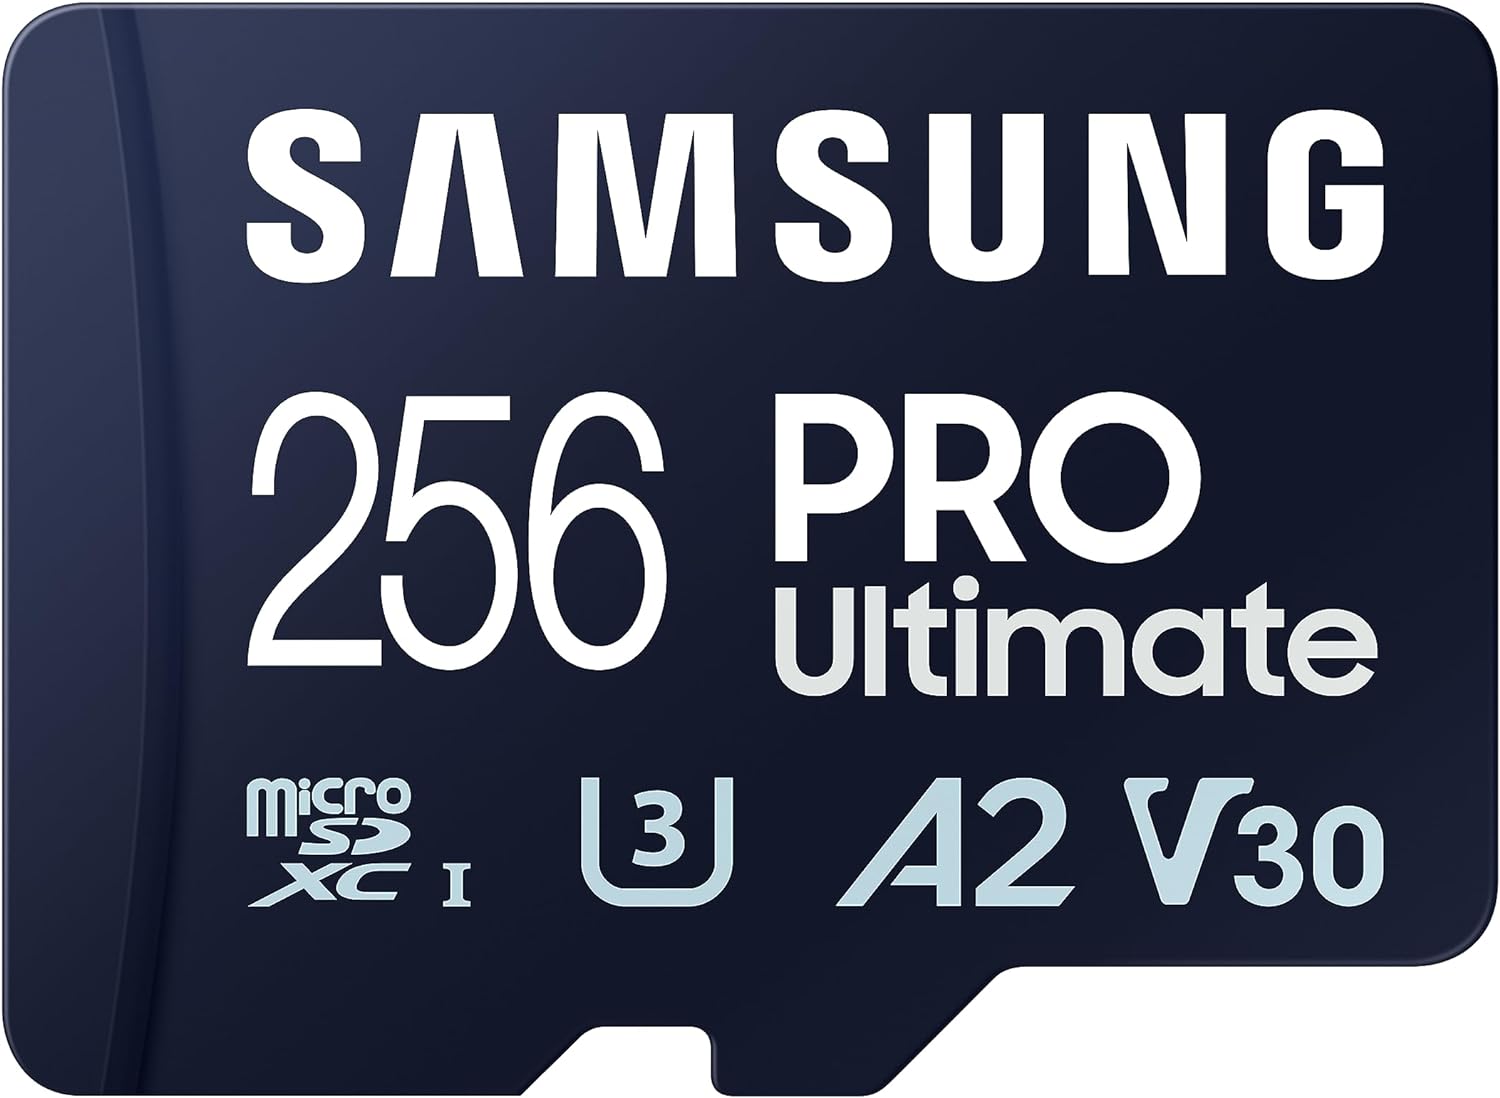 SAMSUNG PRO Ultimate microSD Memory Card + Adapter, 256GB microSDXC, Up to 200 MB/s, 4K UHD, UHS-I, Class 10, U3,V30, A2 for GoPRO Action Cam, DJI Drone, Gaming, Phones, Tablets, MB-MY128SA/AM